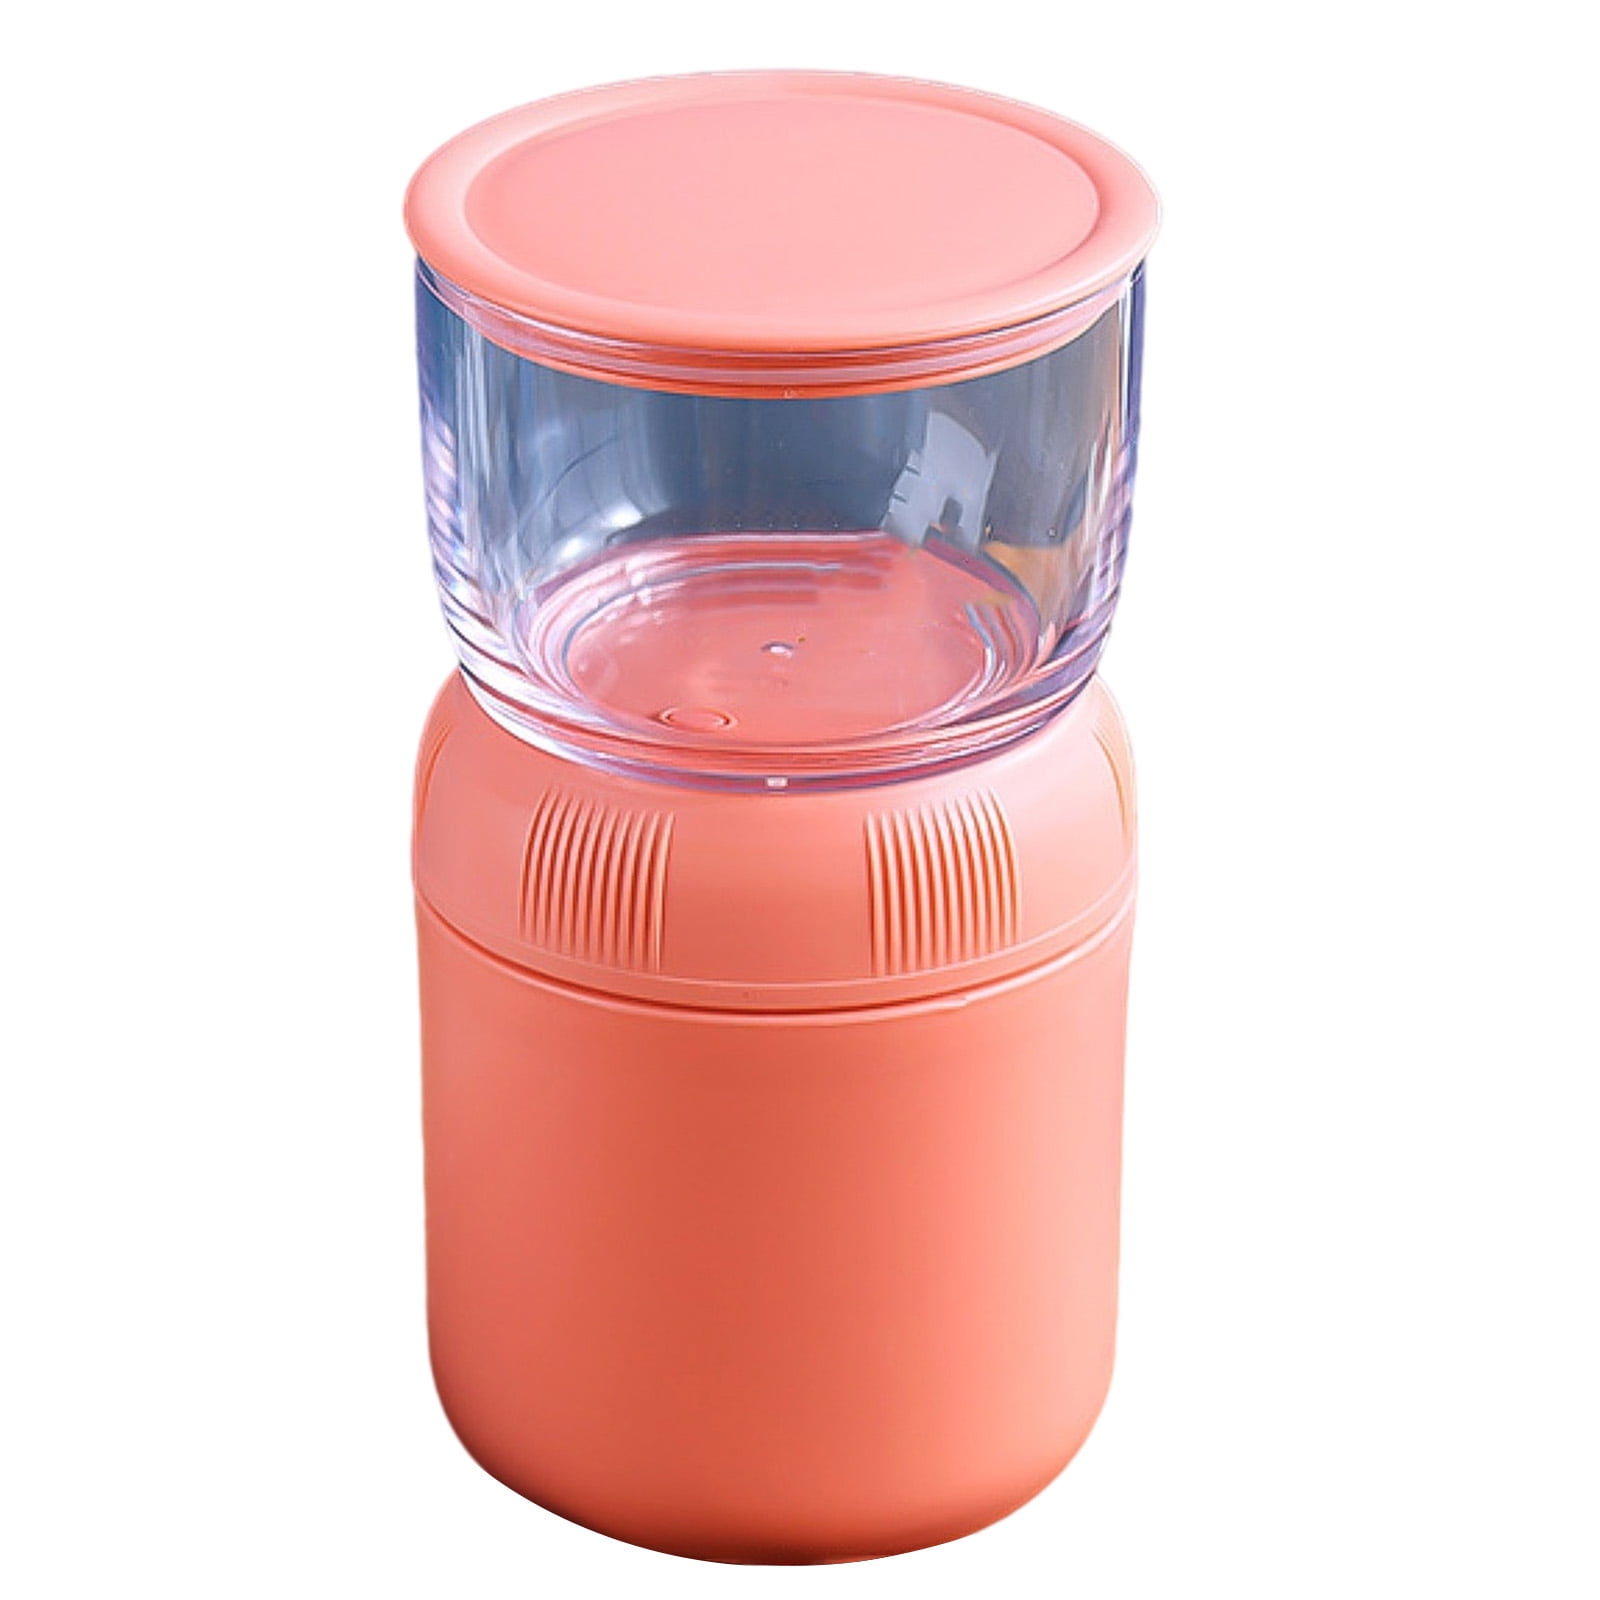 LunchBots Thermal 1 Cup Triple Insulated Thermos, 8 oz - Pink